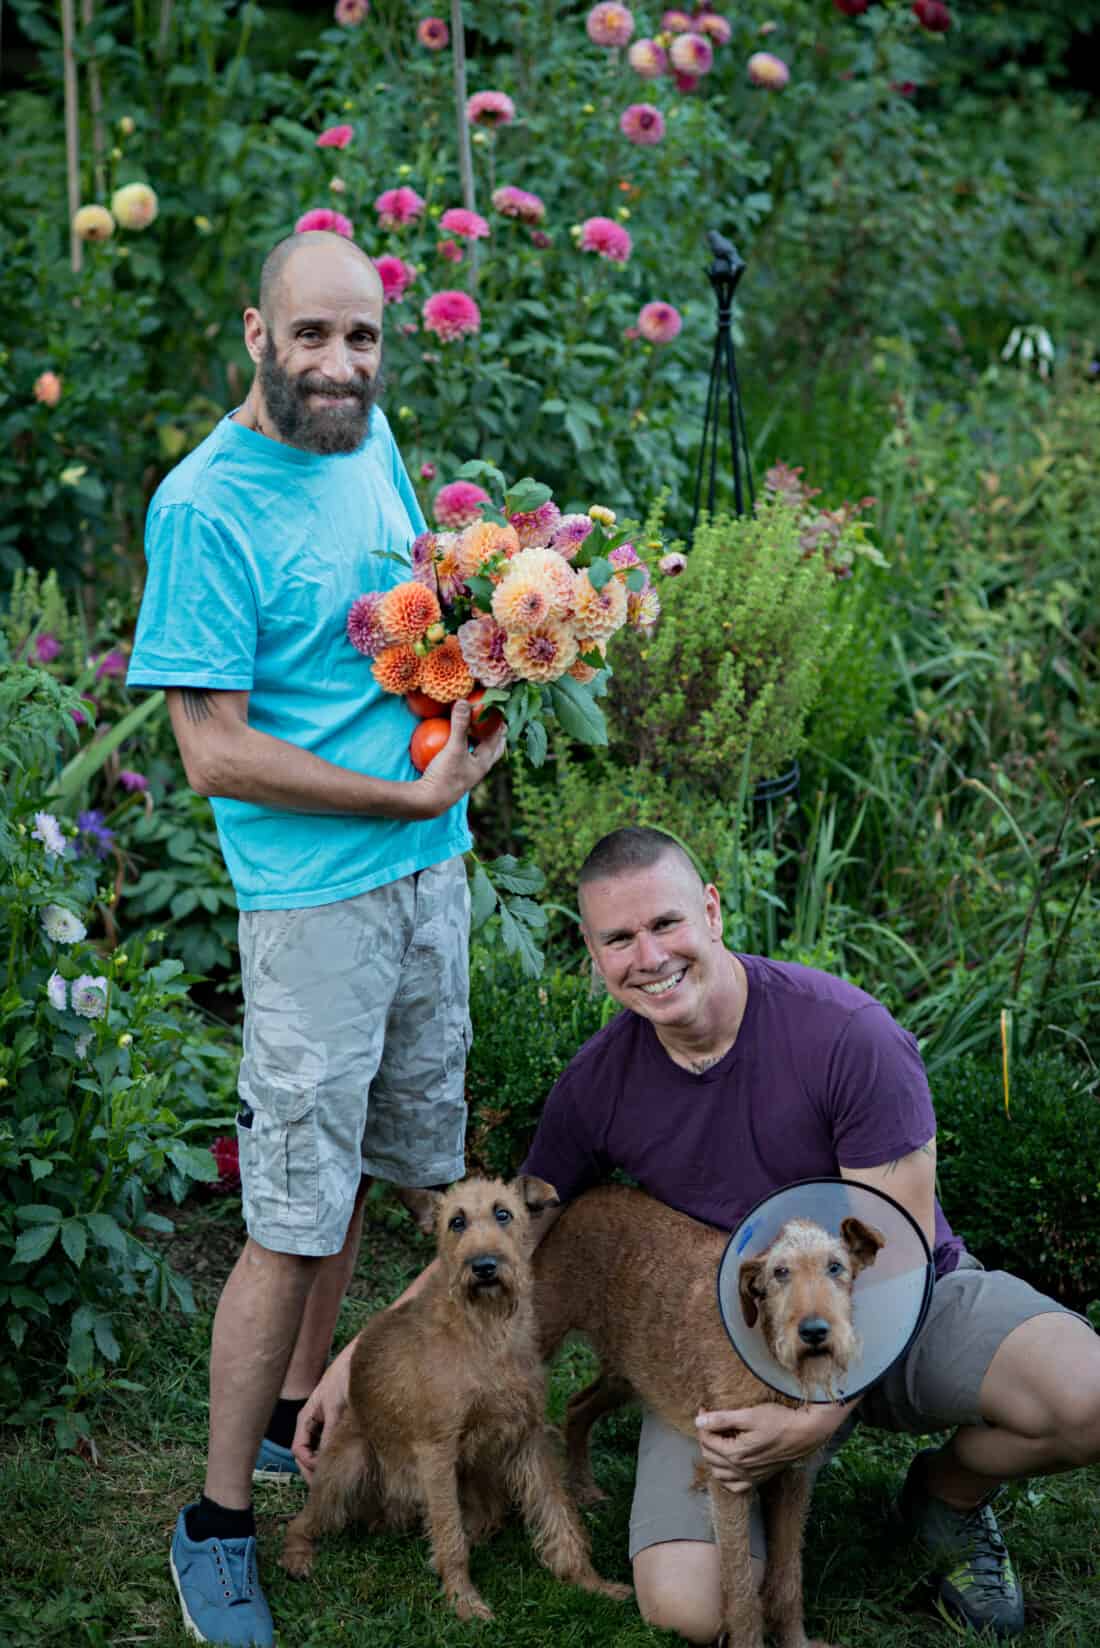 A man standing and holding a colorful bouquet stands next to another man kneeling with two dogs in a lush garden with flowers and trees in the background.